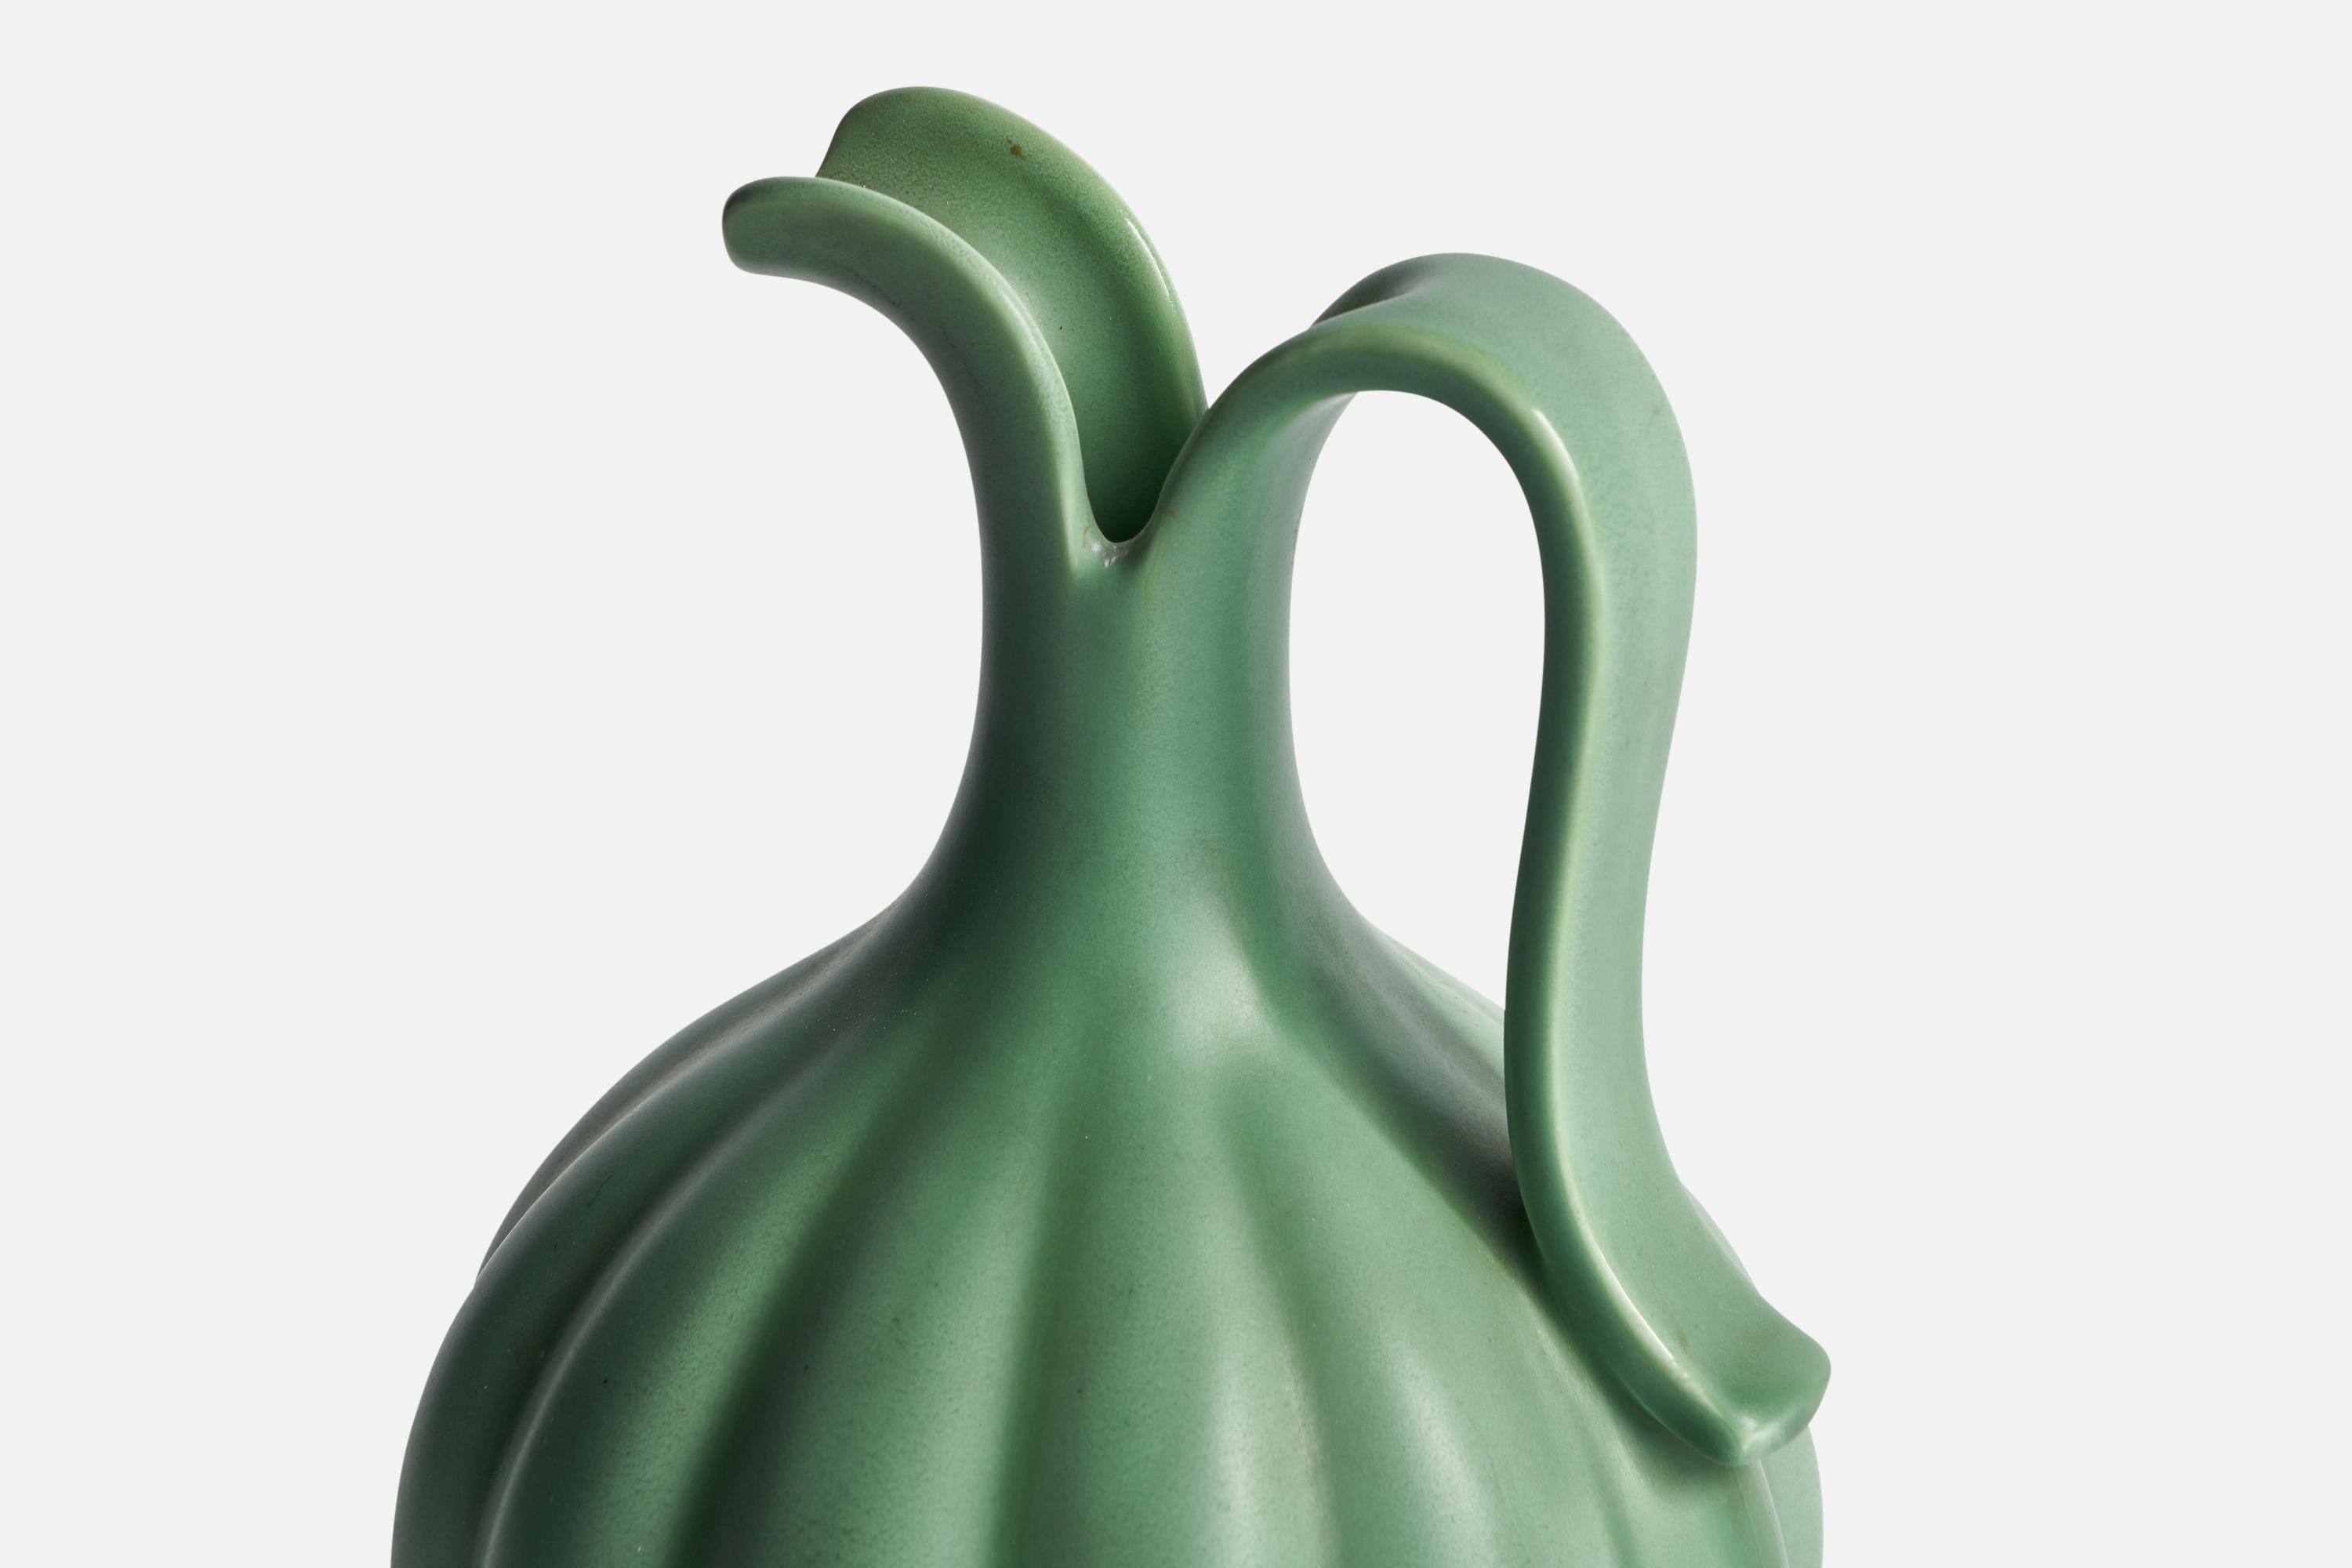 Mid-20th Century Arthur Percy, Pitcher, Ceramic, Sweden, 1930s For Sale